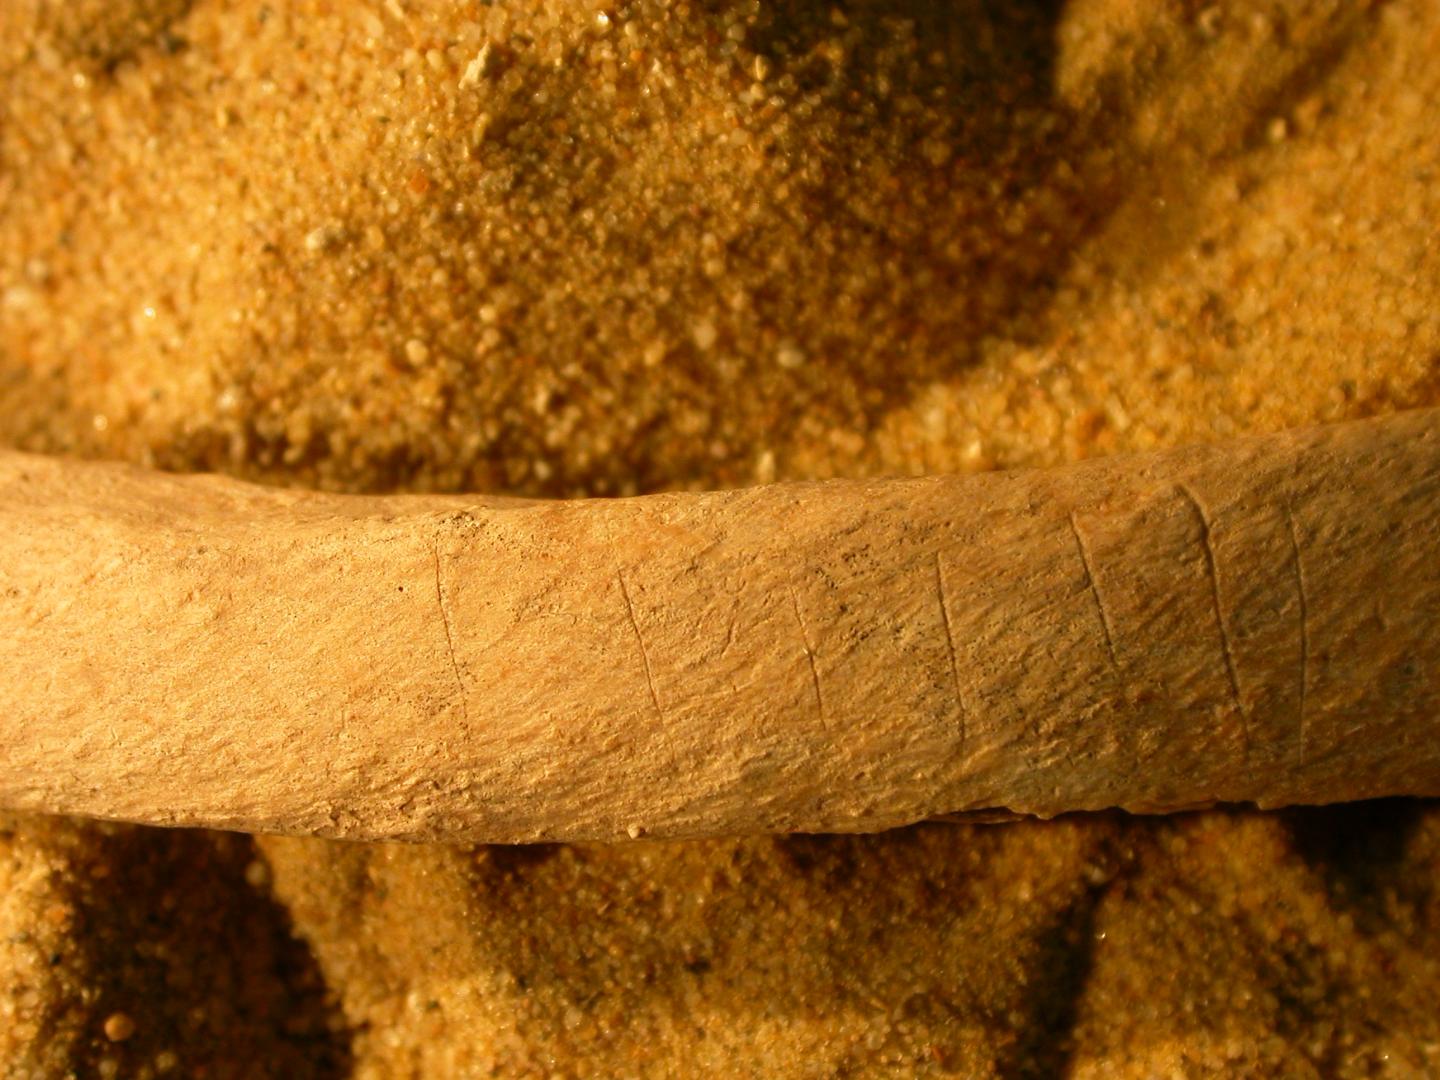 Knife Marks on External Surfaces of Two Rib Bone Fragments